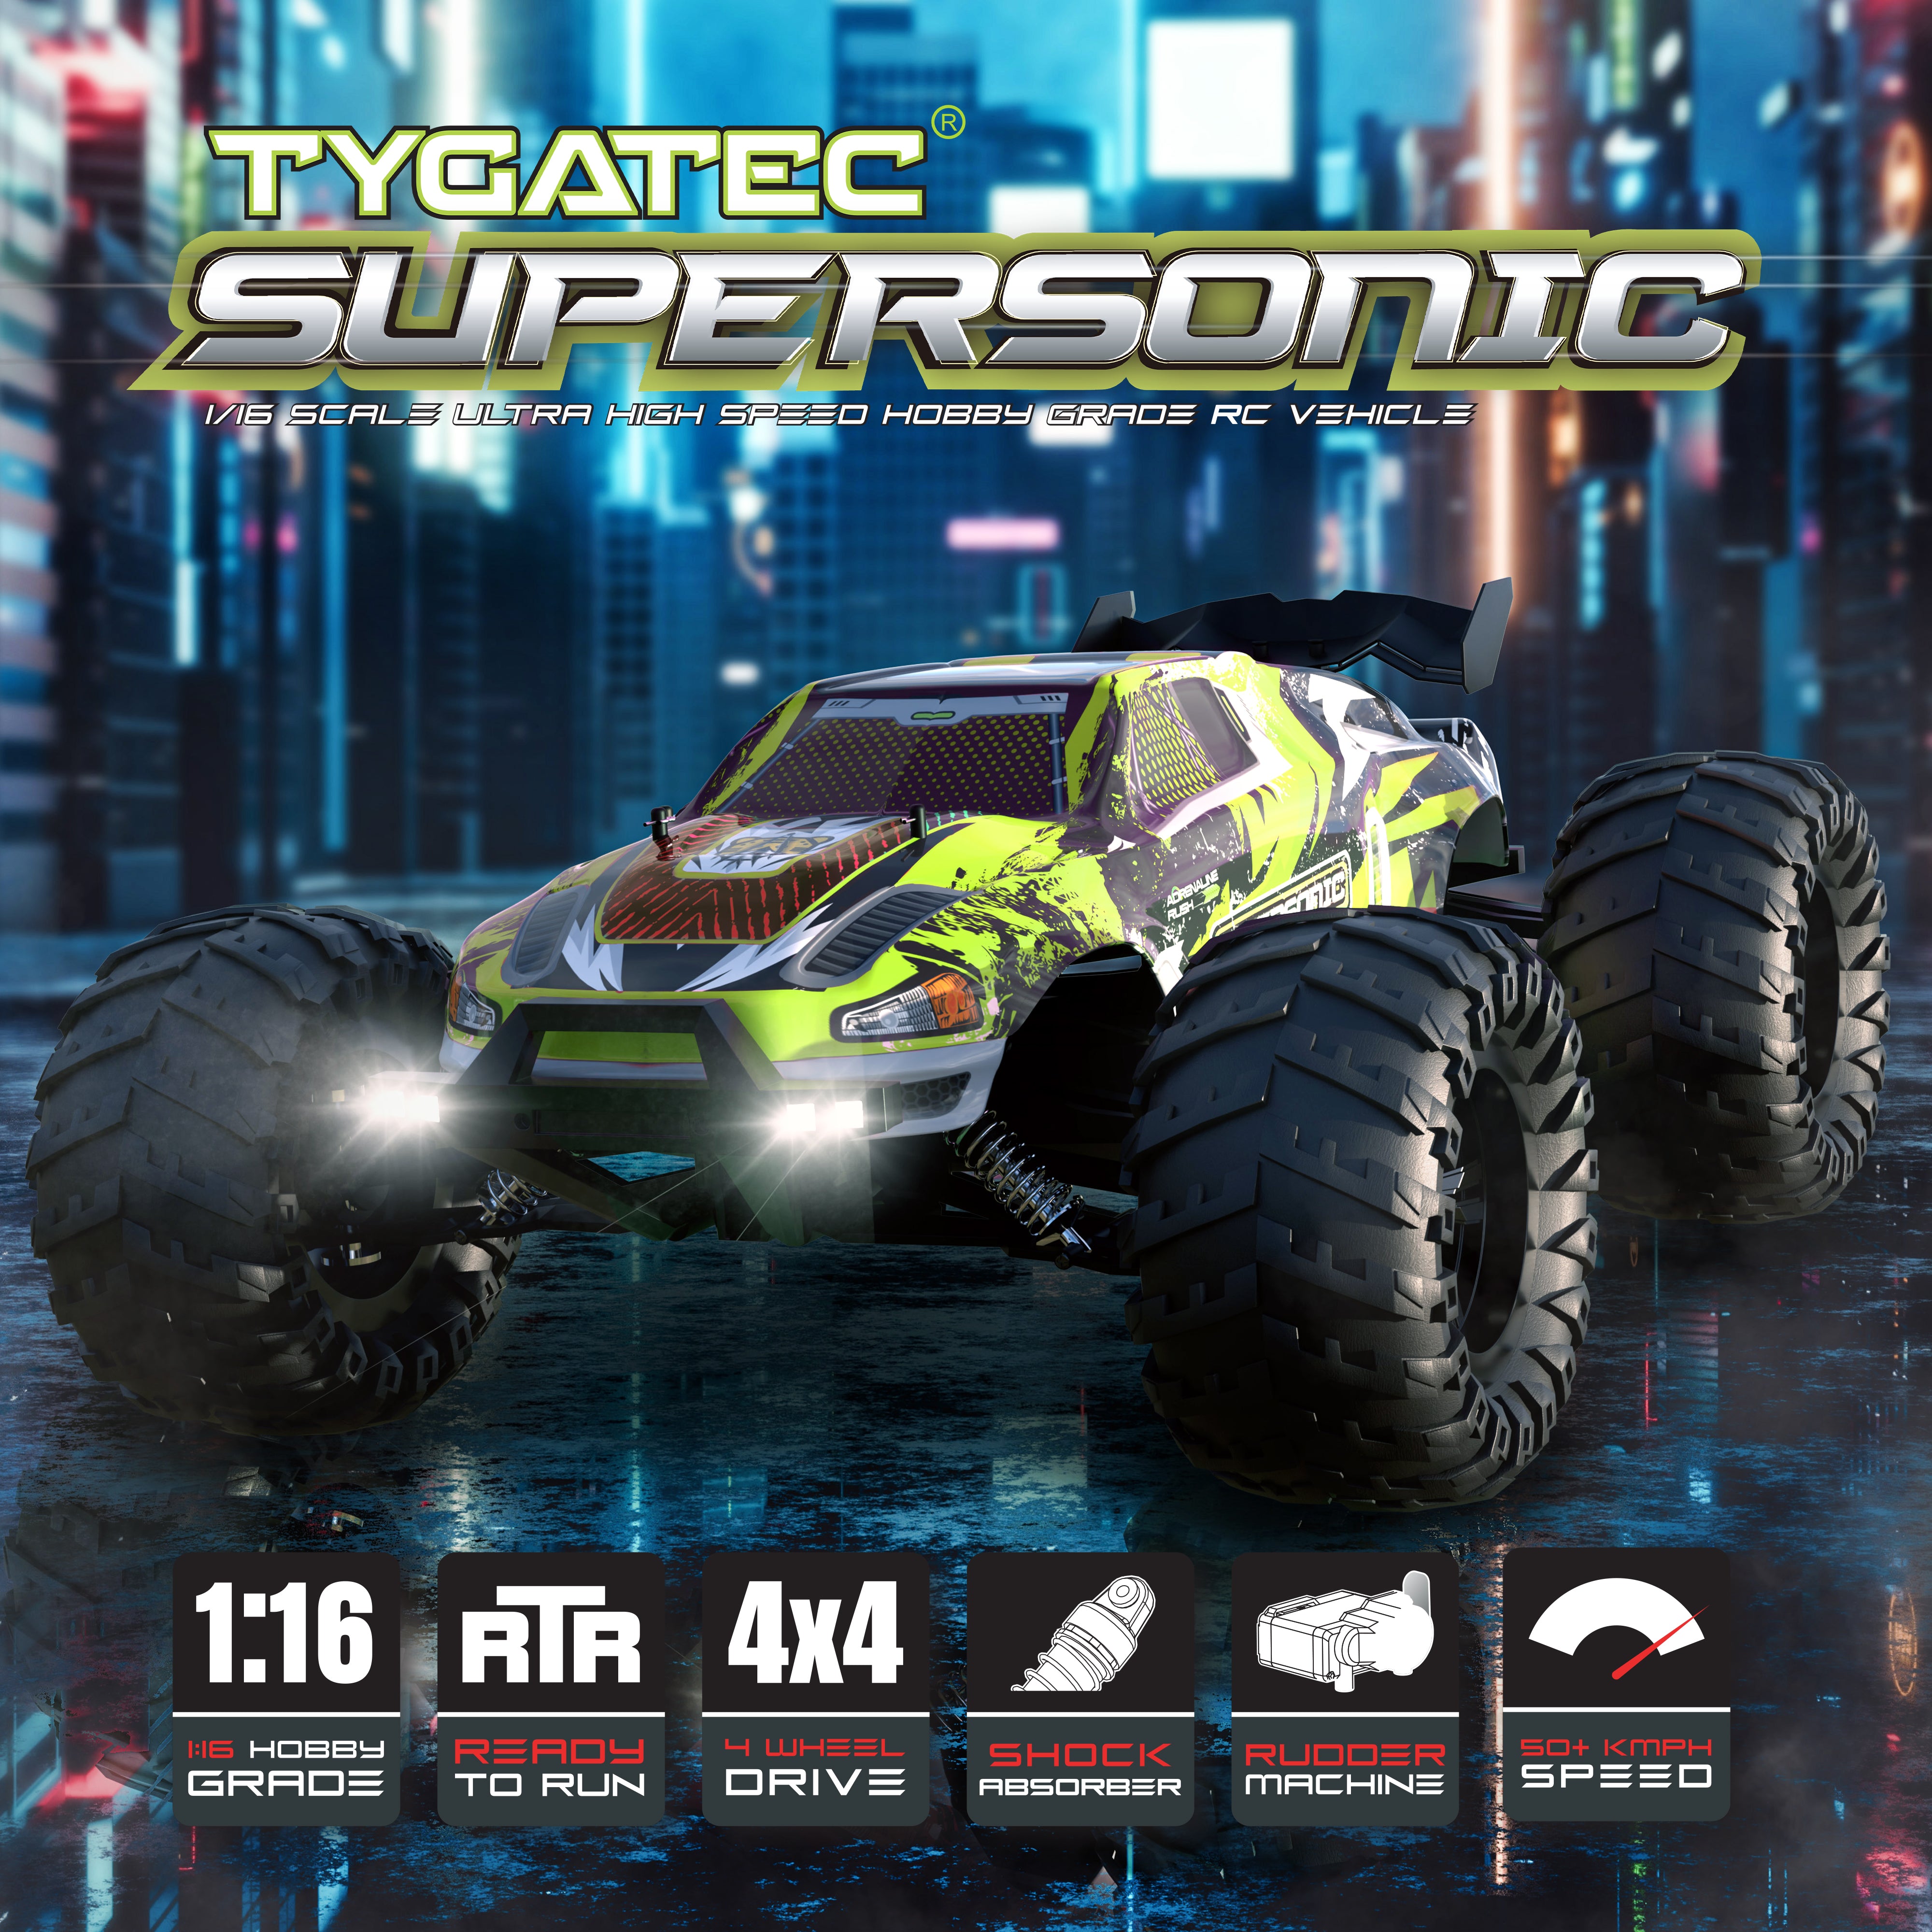 Tygatec Supersonic High Speed Hobby Grade Remote Control (Rc) Car For Kids | Stunt Car (Color Green)